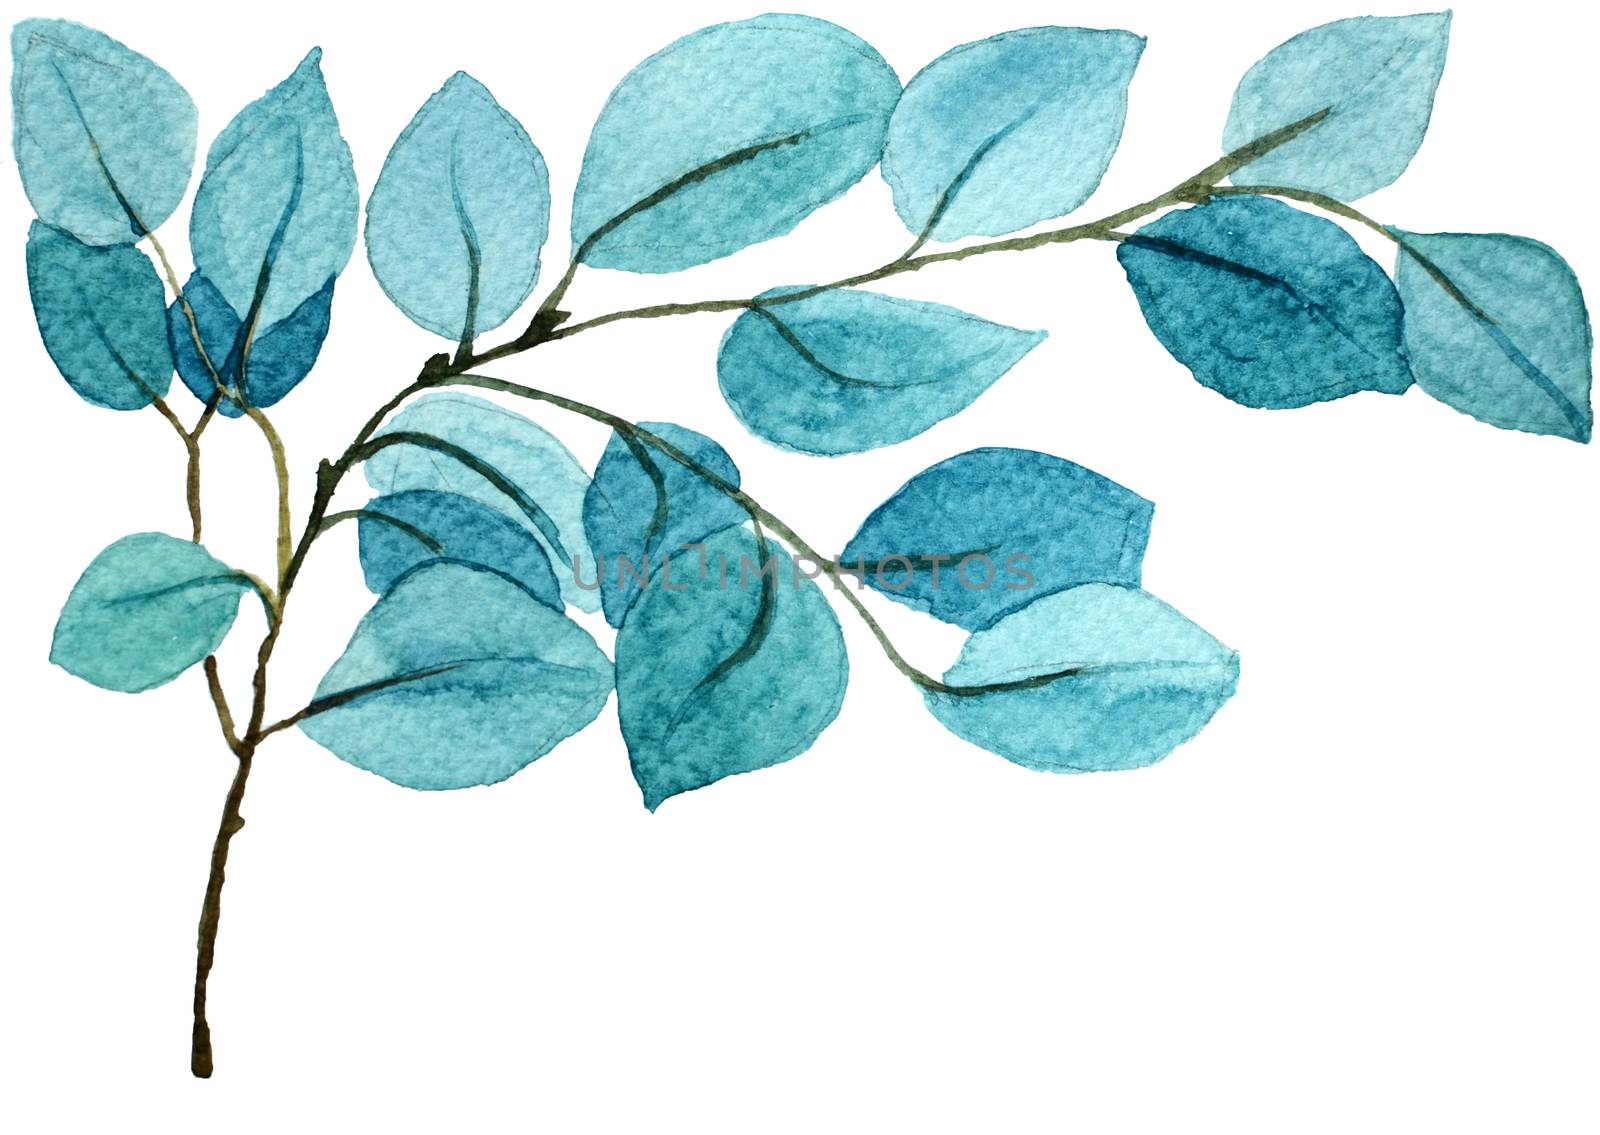 Blue retro exotic menthol branch with leaves. Ornate delicate watercolor flowers for wedding invitations, greeting cards, blogs, posters by kimbo-bo